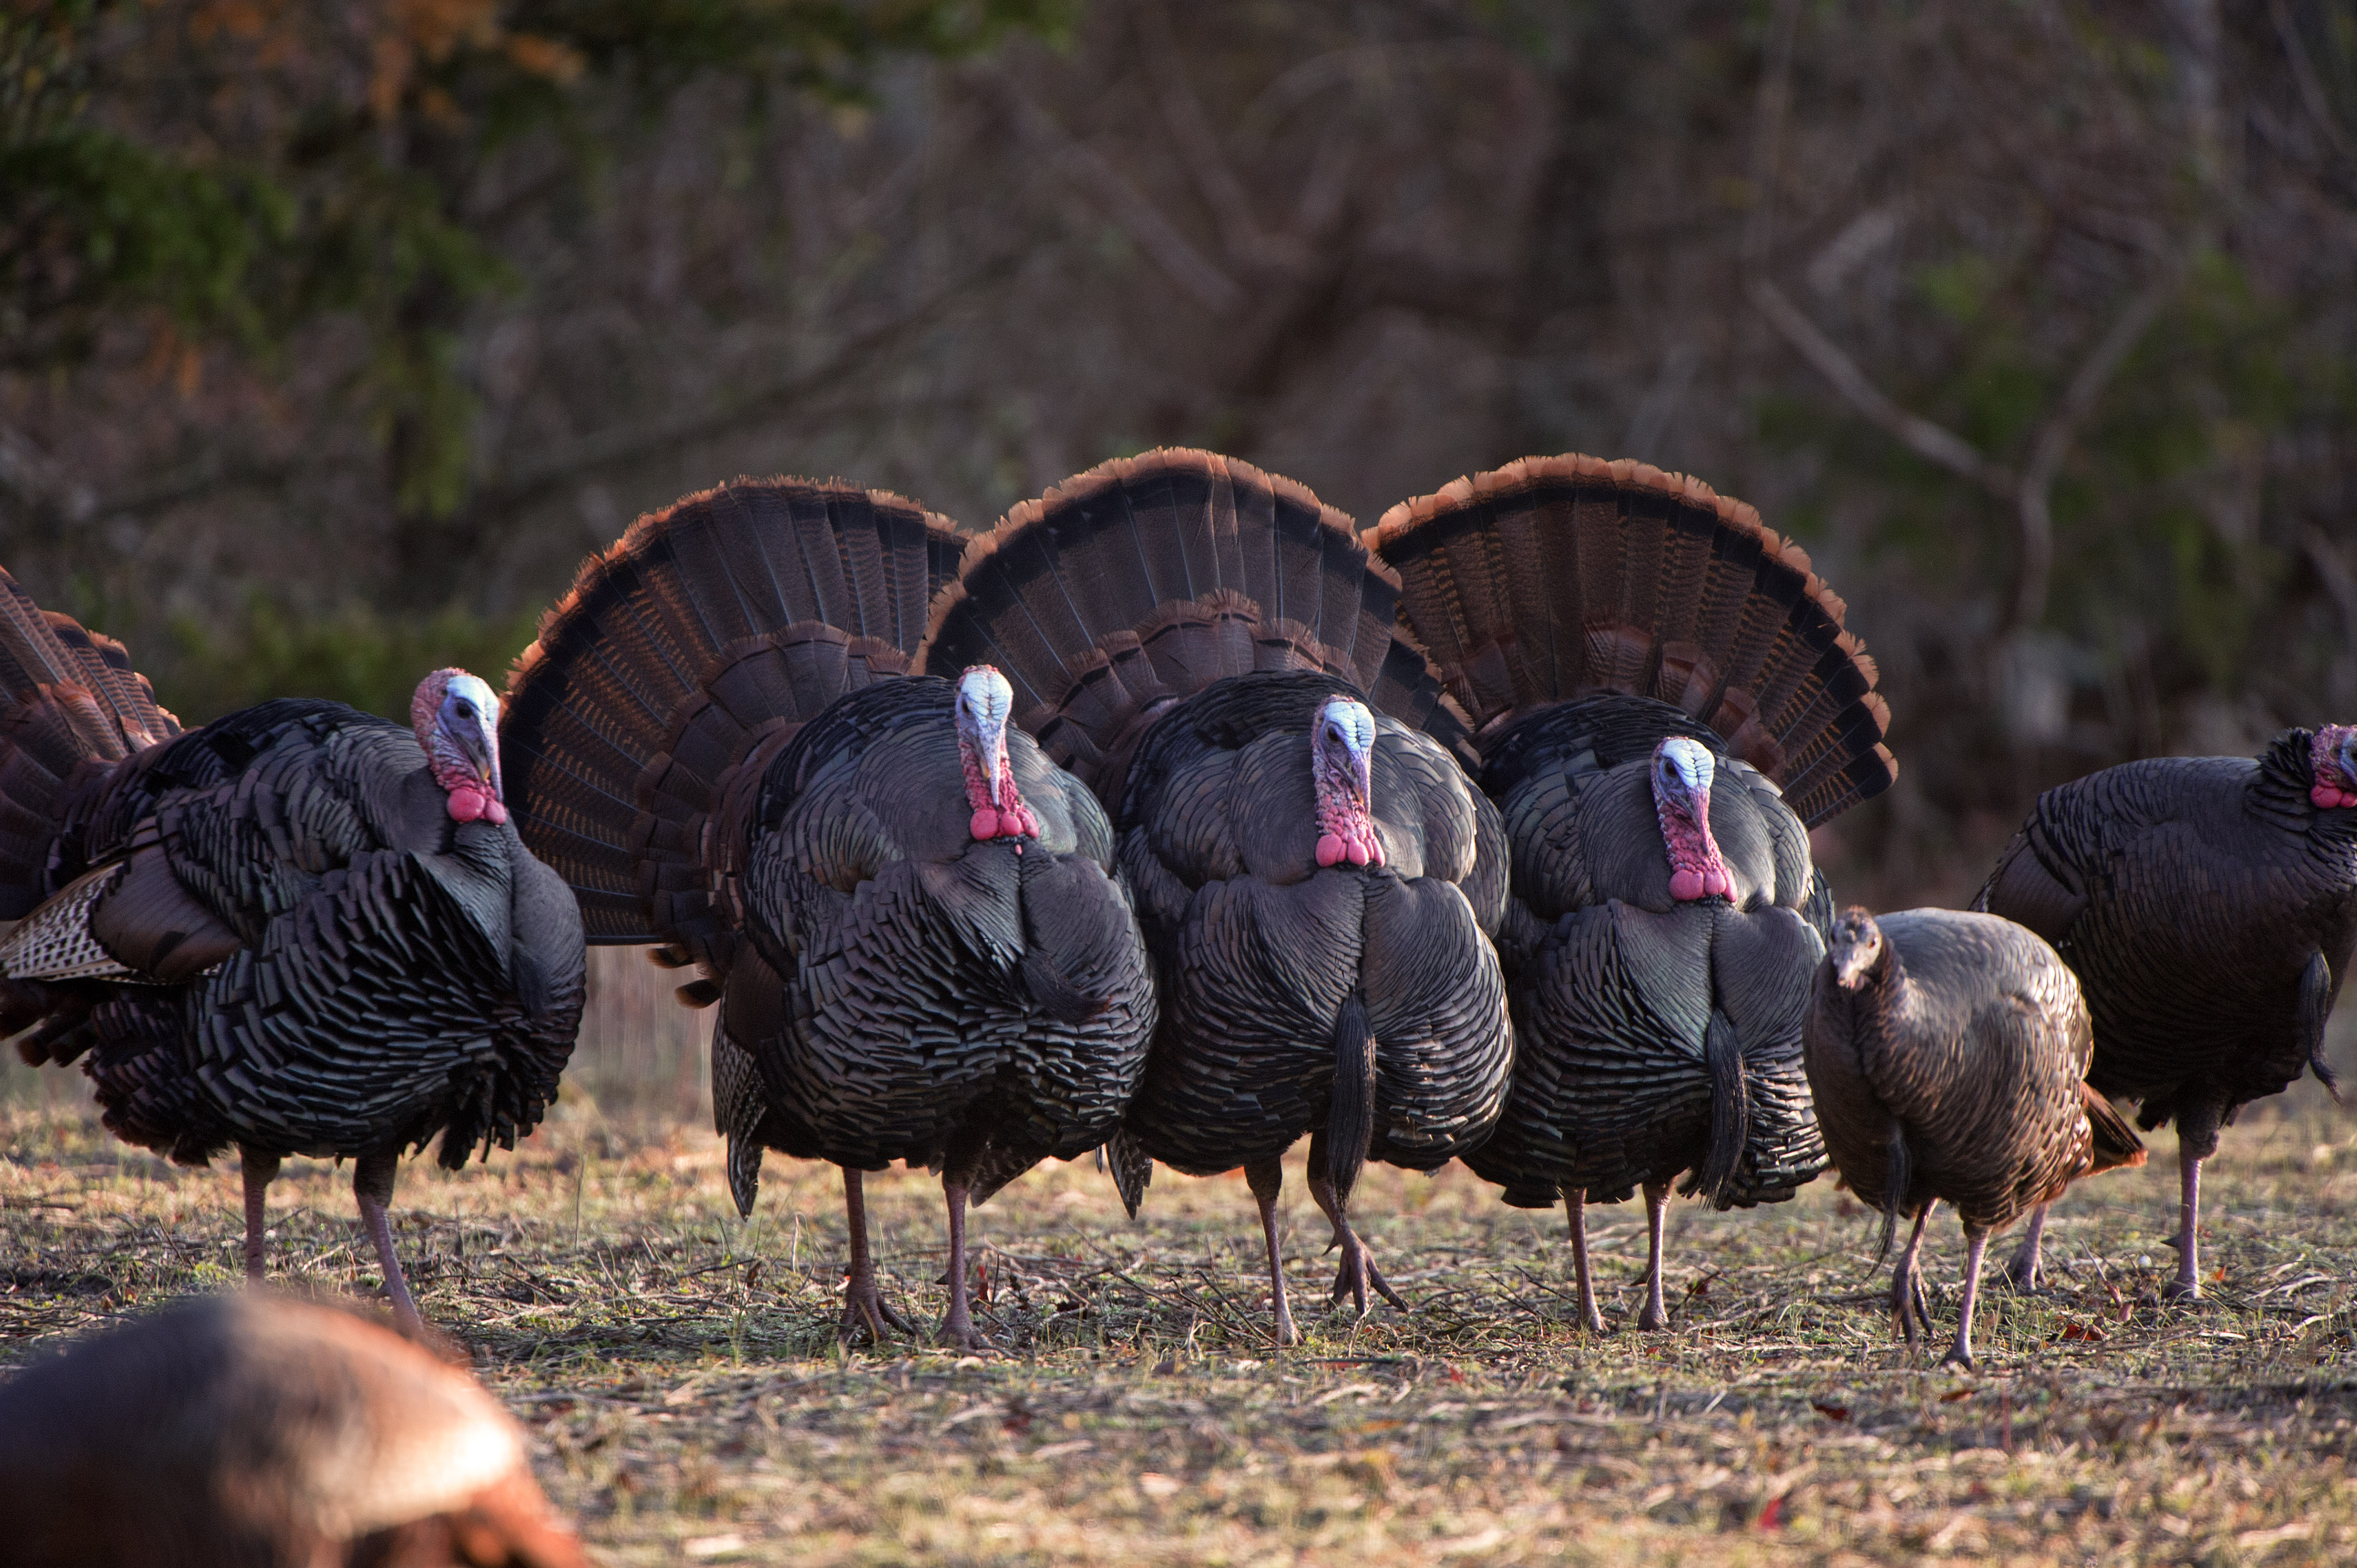 Take An Online Hunters Safety Course Now For Turkey Season